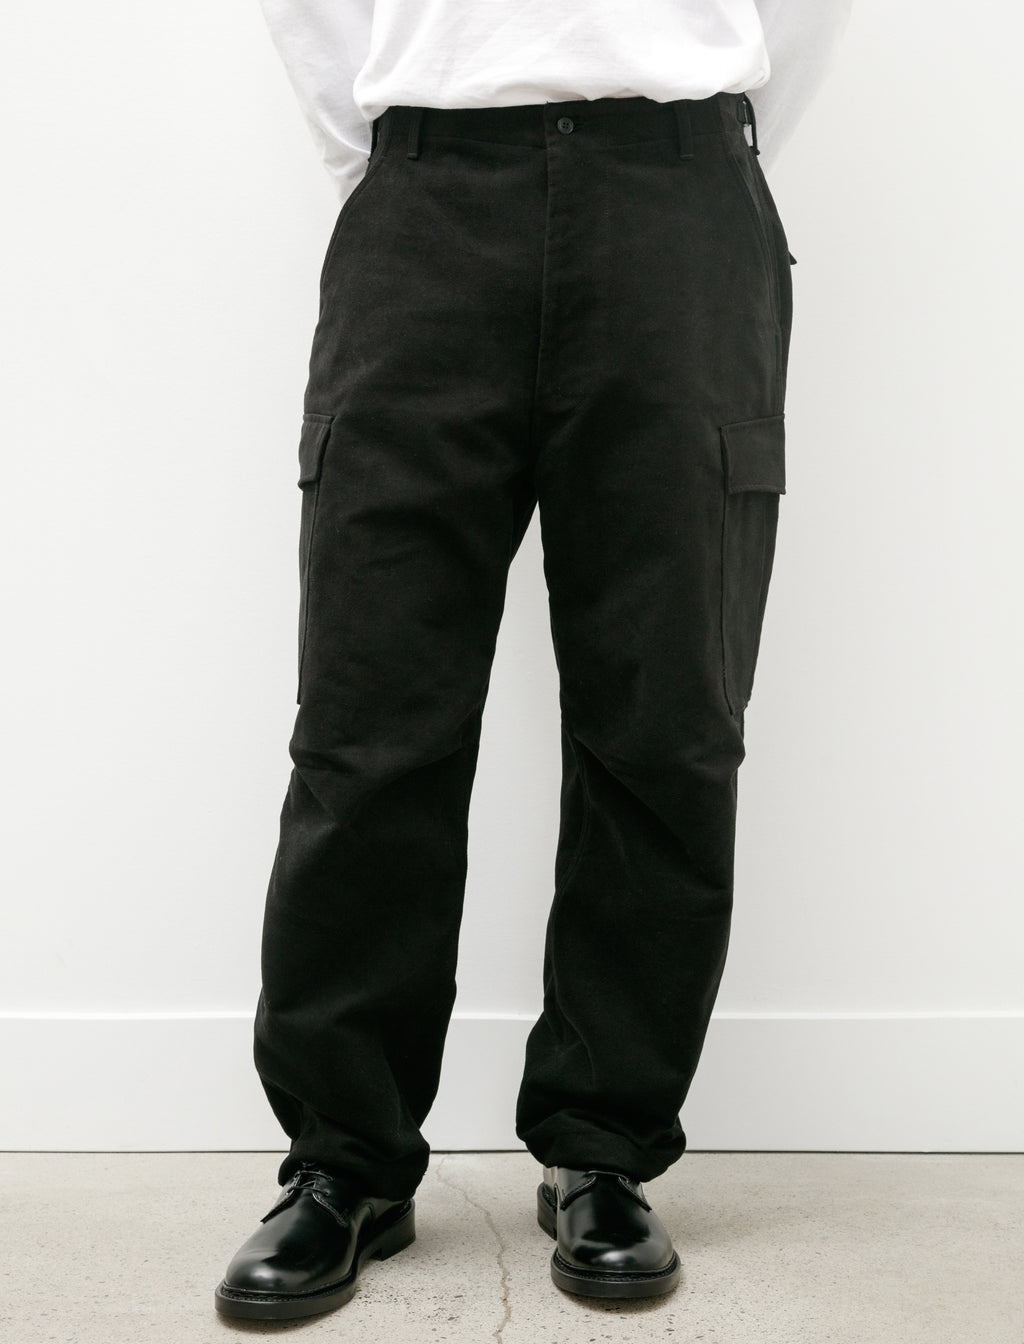 New BDU 2.0 Work Pants with Updated Features